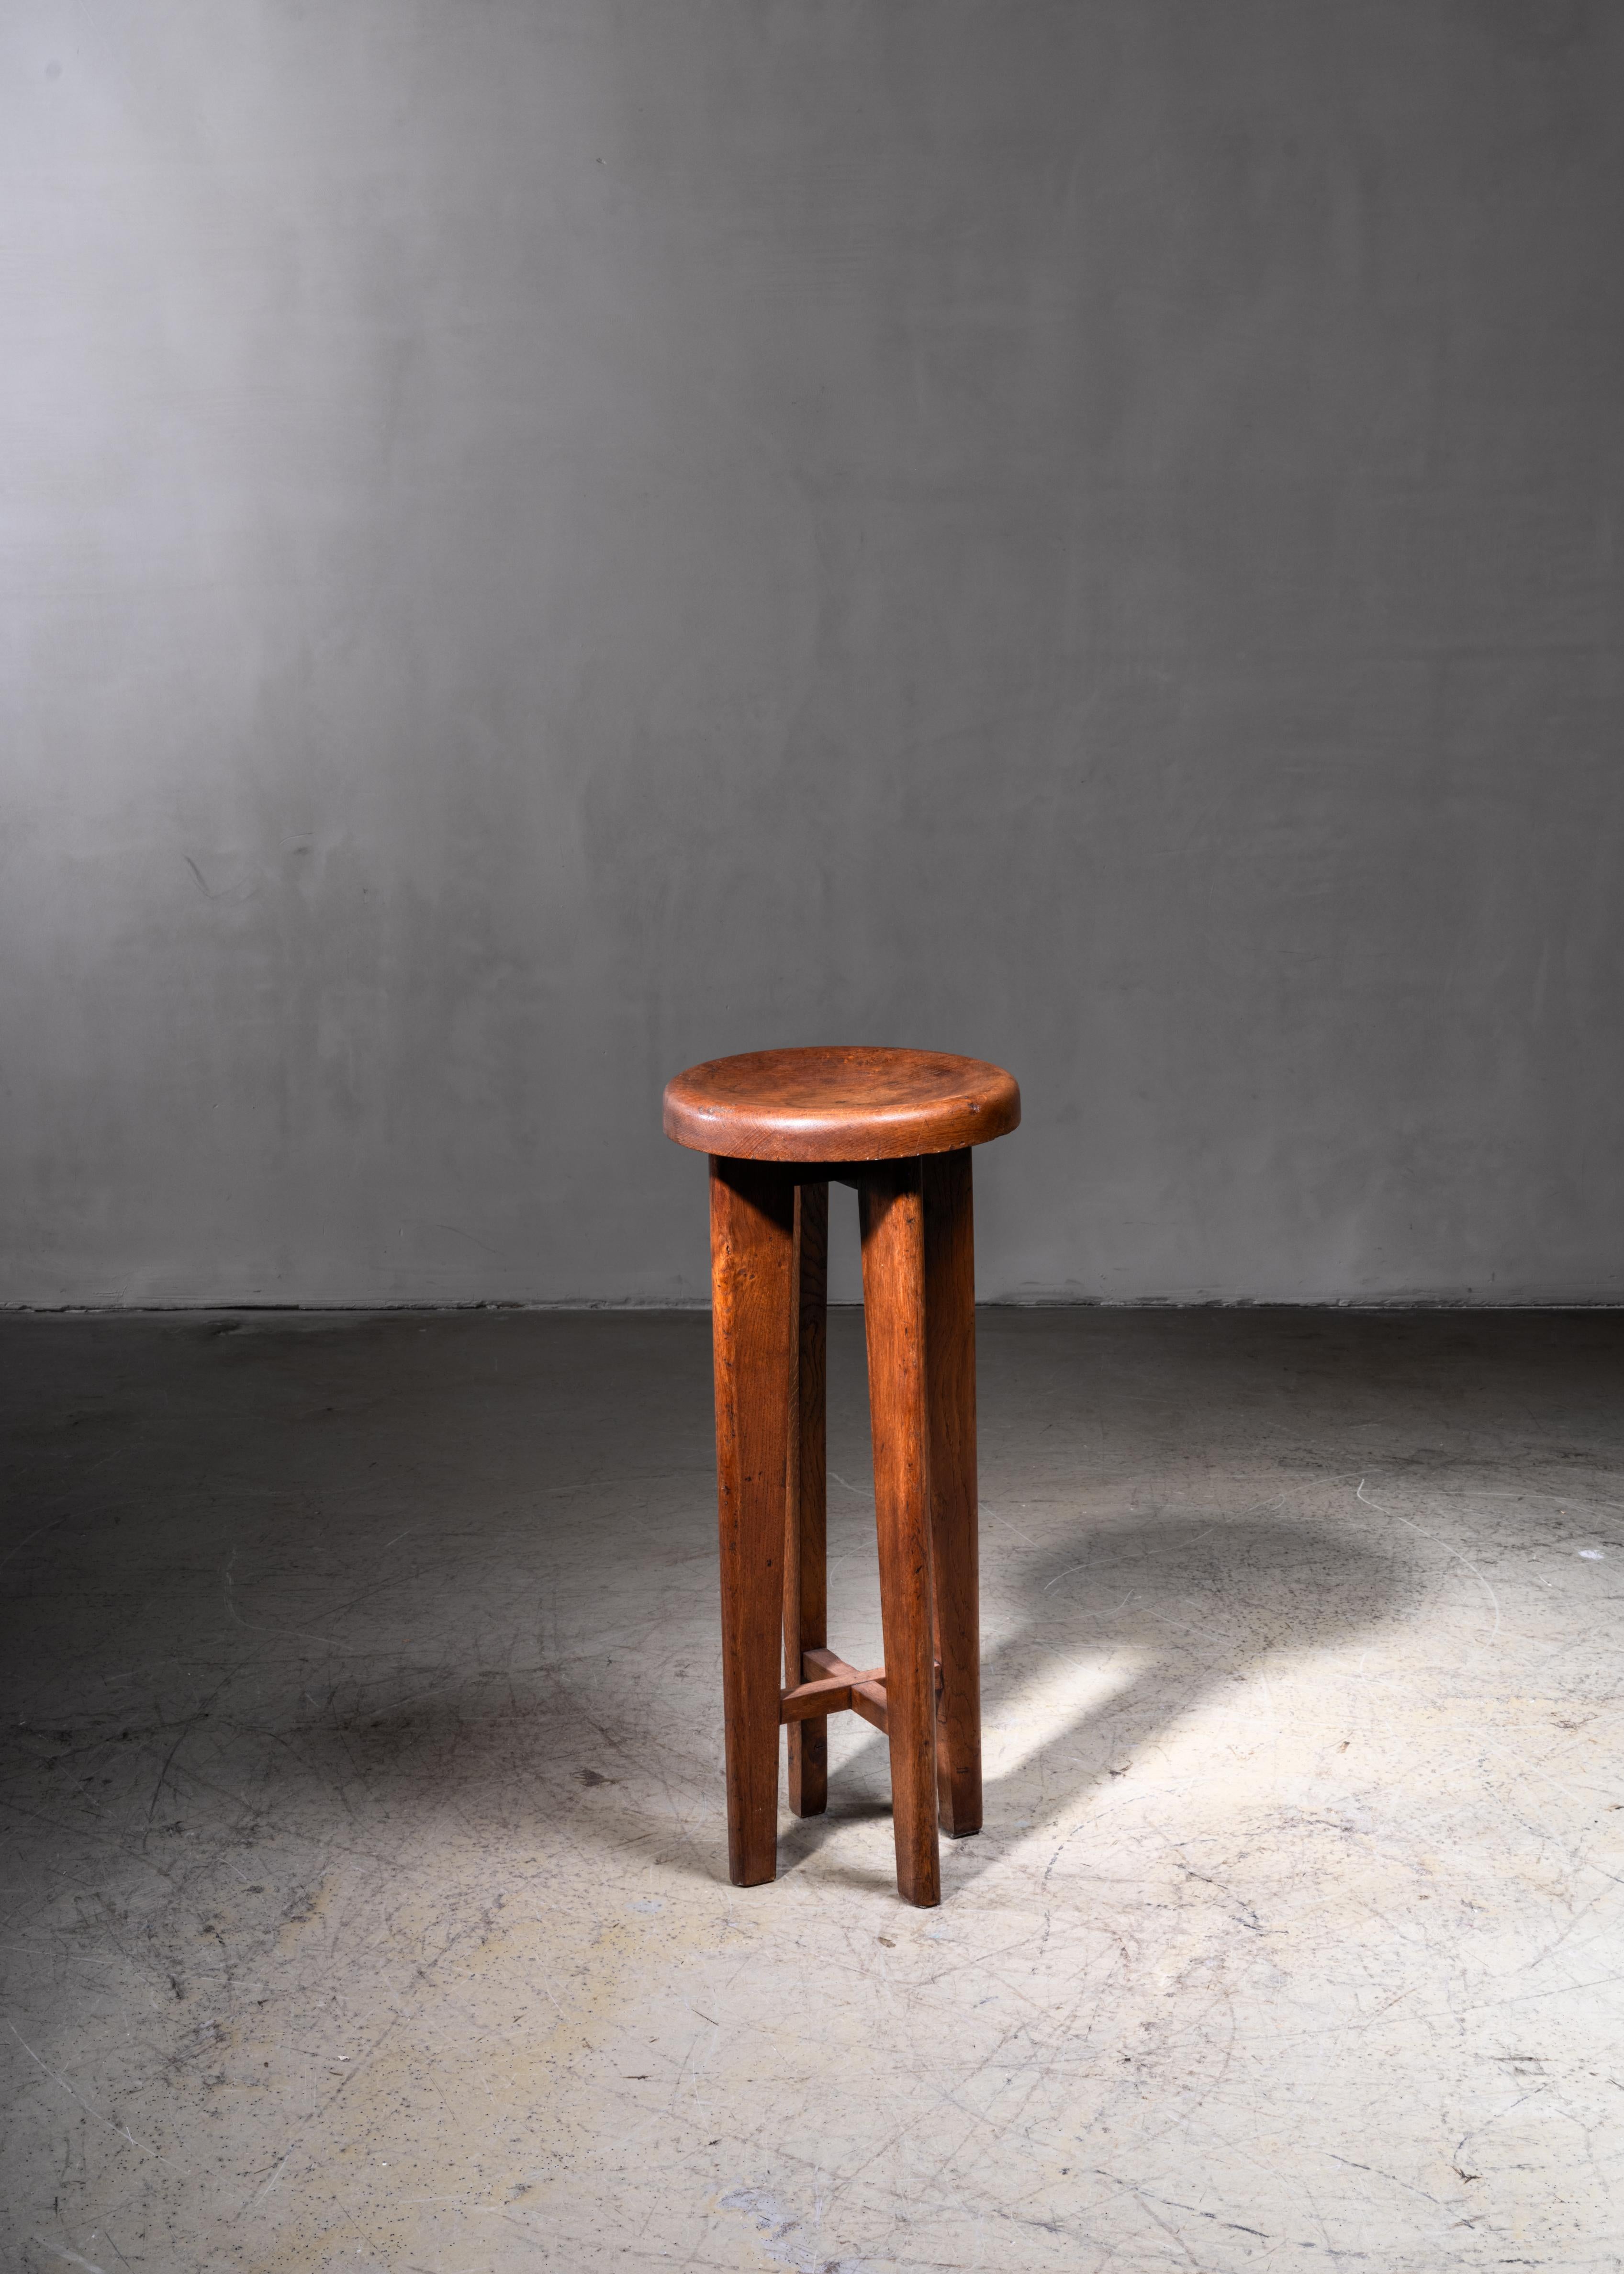 A high French stool in solid oak. It has architectural legs and a wonderful inward curved seat. A beautiful piece with a stunning patina. The stool is reminiscent of the work of Charlotte Perriand and Pierre Jeanneret.